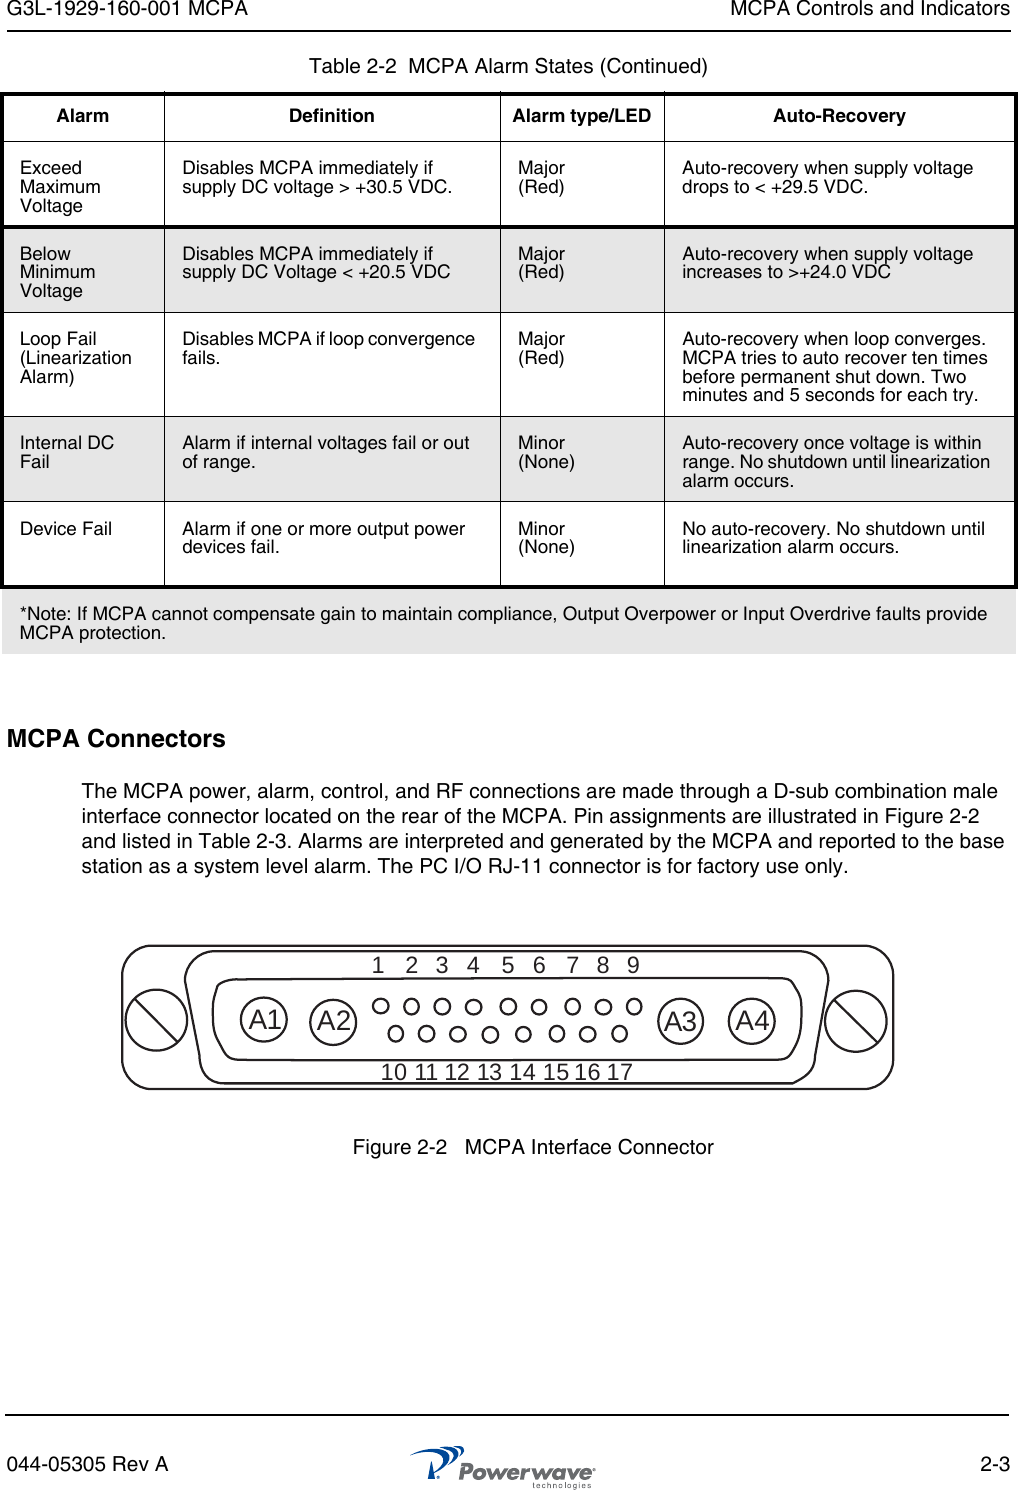 G3L-1929-160-001 MCPA MCPA Controls and Indicators044-05305 Rev A 2-3MCPA ConnectorsThe MCPA power, alarm, control, and RF connections are made through a D-sub combination male interface connector located on the rear of the MCPA. Pin assignments are illustrated in Figure 2-2 and listed in Table 2-3. Alarms are interpreted and generated by the MCPA and reported to the base station as a system level alarm. The PC I/O RJ-11 connector is for factory use only.Exceed Maximum VoltageDisables MCPA immediately if supply DC voltage &gt; +30.5 VDC.Major(Red)Auto-recovery when supply voltage drops to &lt; +29.5 VDC.Below Minimum VoltageDisables MCPA immediately if supply DC Voltage &lt; +20.5 VDCMajor(Red)Auto-recovery when supply voltage increases to &gt;+24.0 VDCLoop Fail (Linearization Alarm)Disables MCPA if loop convergence fails.Major(Red)Auto-recovery when loop converges. MCPA tries to auto recover ten times before permanent shut down. Two minutes and 5 seconds for each try.Internal DC FailAlarm if internal voltages fail or out of range.Minor(None)Auto-recovery once voltage is within range. No shutdown until linearization alarm occurs.Device Fail Alarm if one or more output power devices fail.Minor(None)No auto-recovery. No shutdown until linearization alarm occurs.*Note: If MCPA cannot compensate gain to maintain compliance, Output Overpower or Input Overdrive faults provide MCPA protection.Table 2-2  MCPA Alarm States (Continued)Alarm Definition Alarm type/LED Auto-RecoveryFigure 2-2   MCPA Interface Connector123A1 A2 A3 A445678910 11 12 13 14 15 16 17